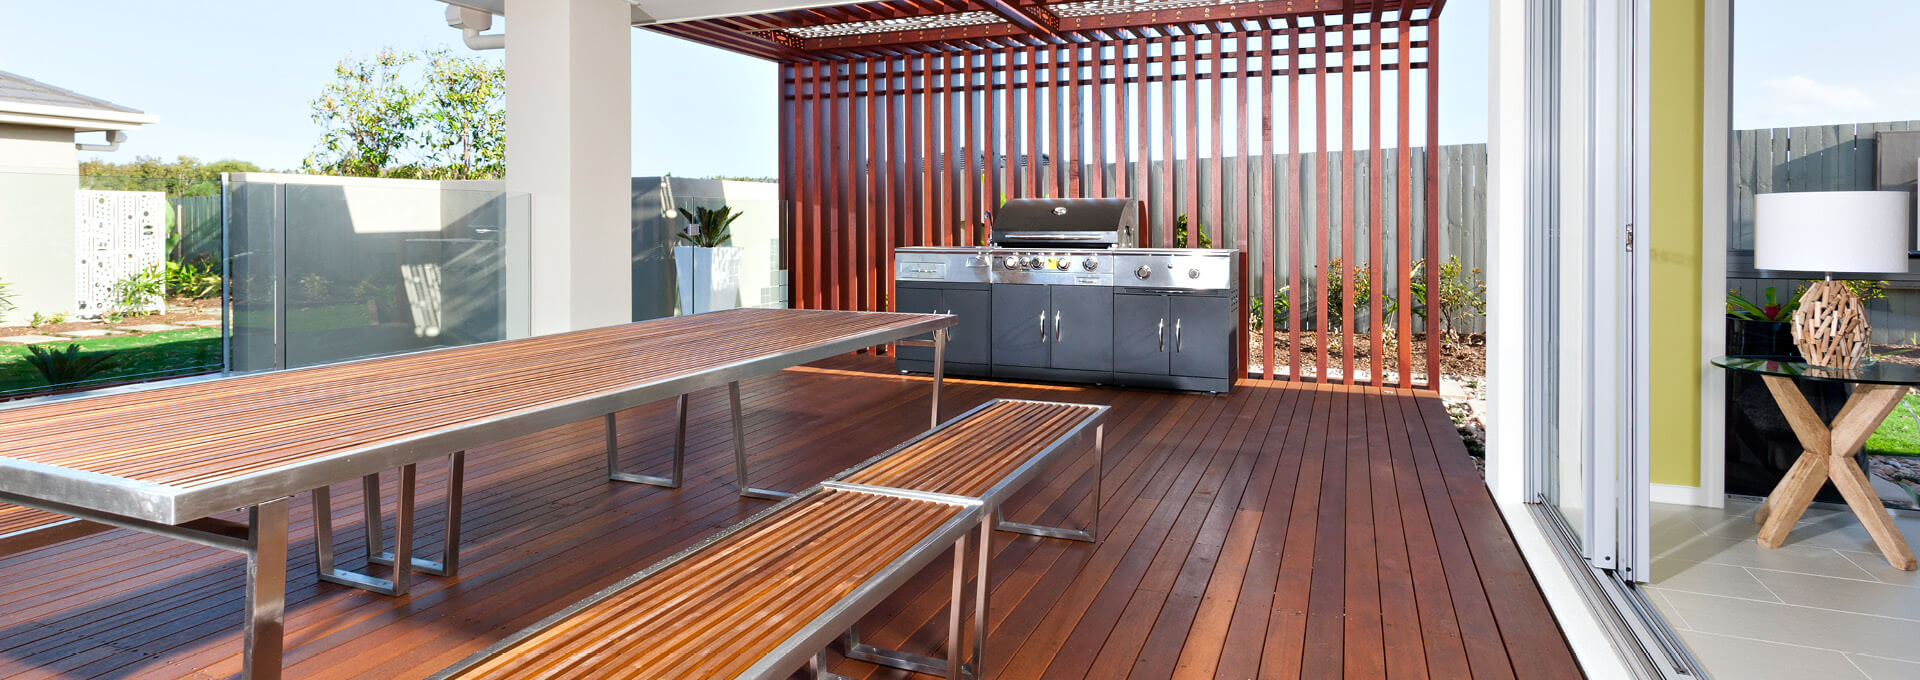 Custom Stainless steel barbeque area